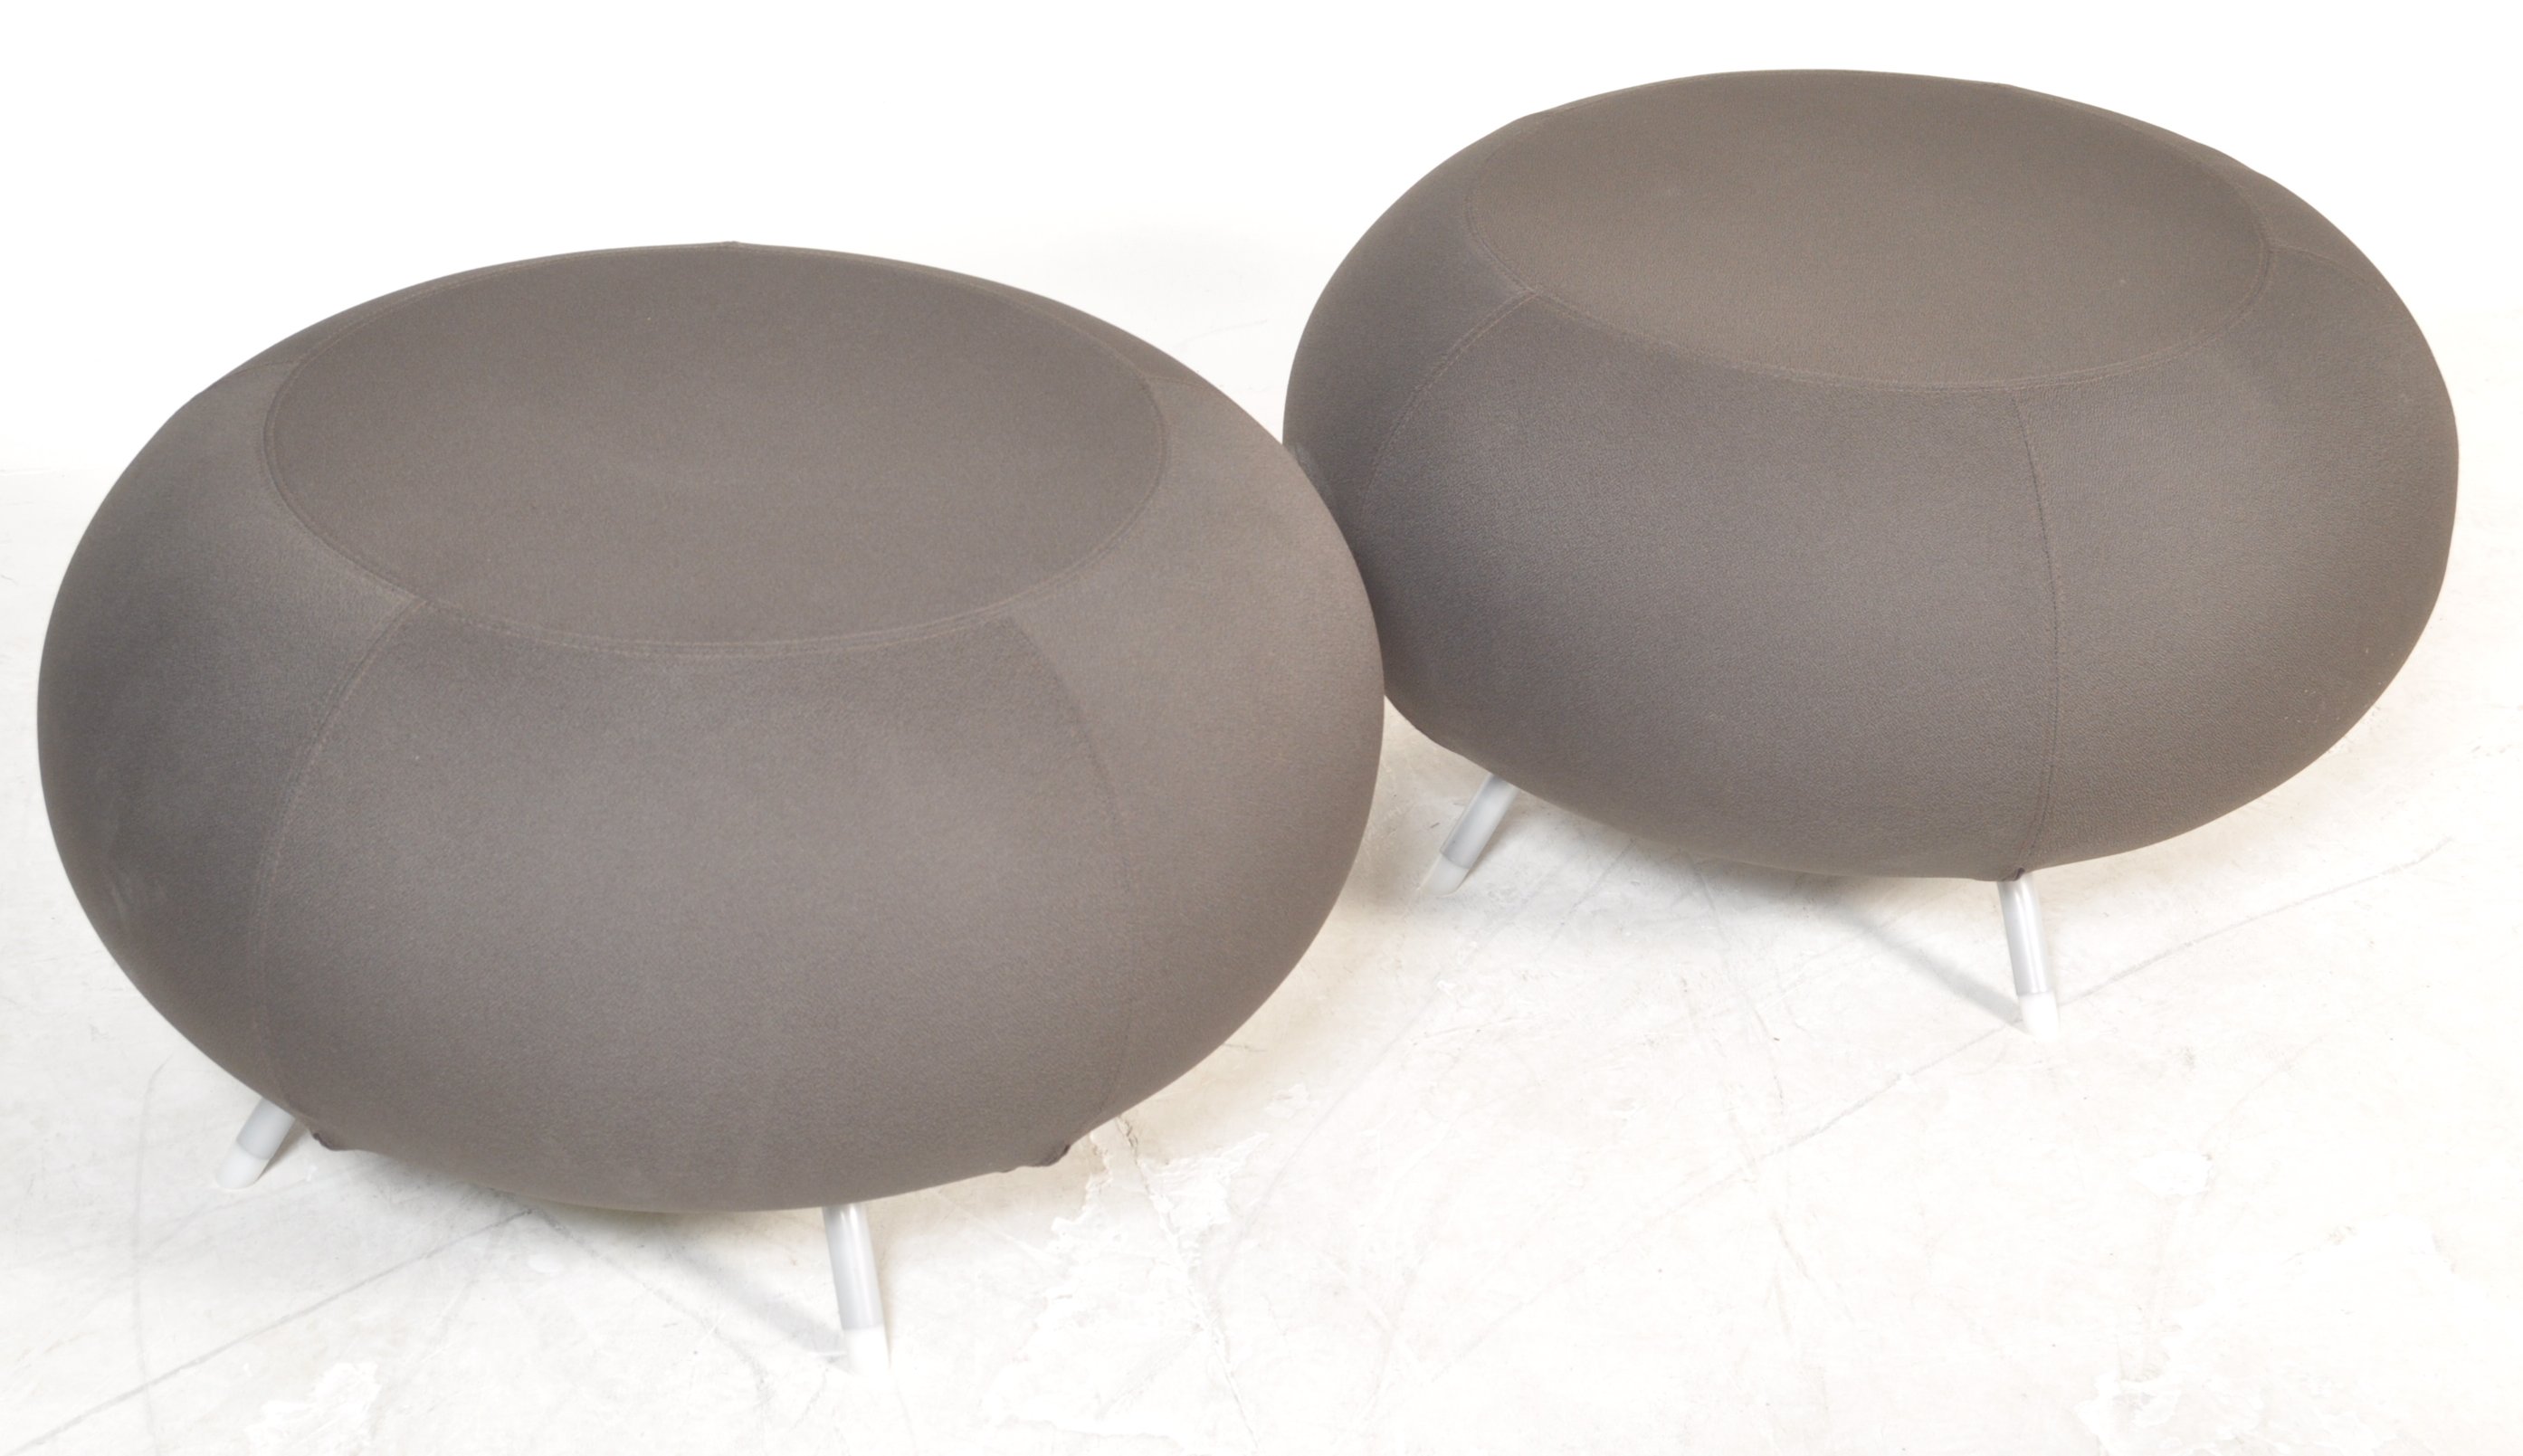 ALLEMUIR A620 MOULDED FOAM PEBBLE CHAIR / STOOL - Image 2 of 5